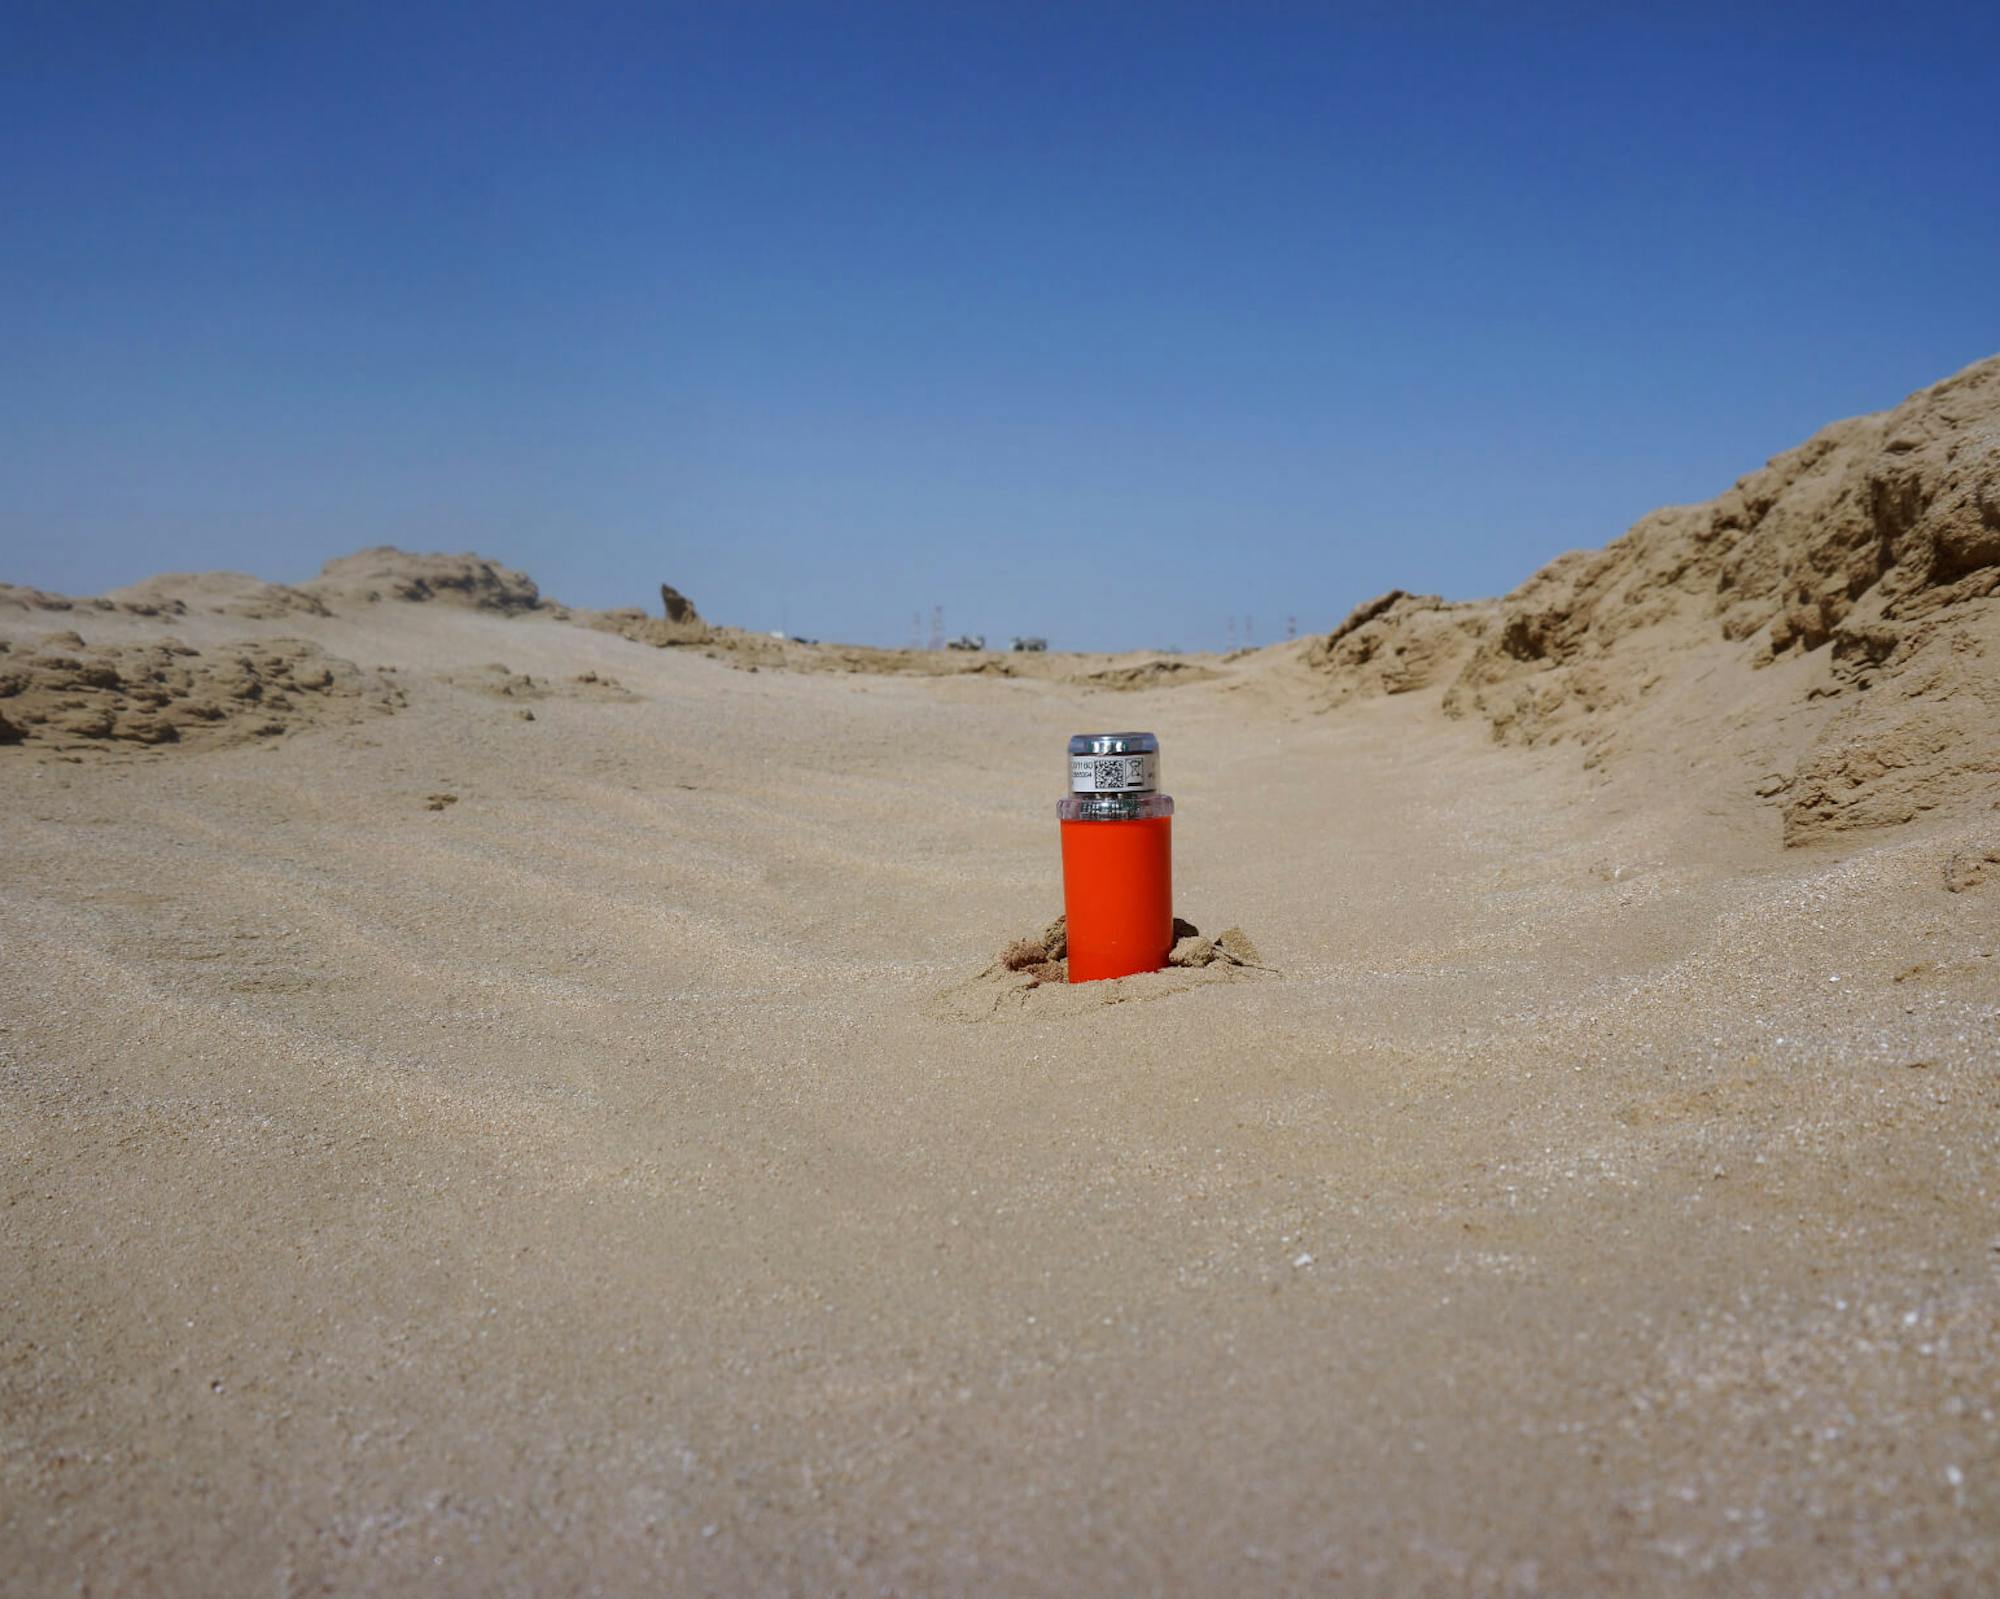 STRYDE node buried in the sand in the desert for seismic exploration and acquisition 